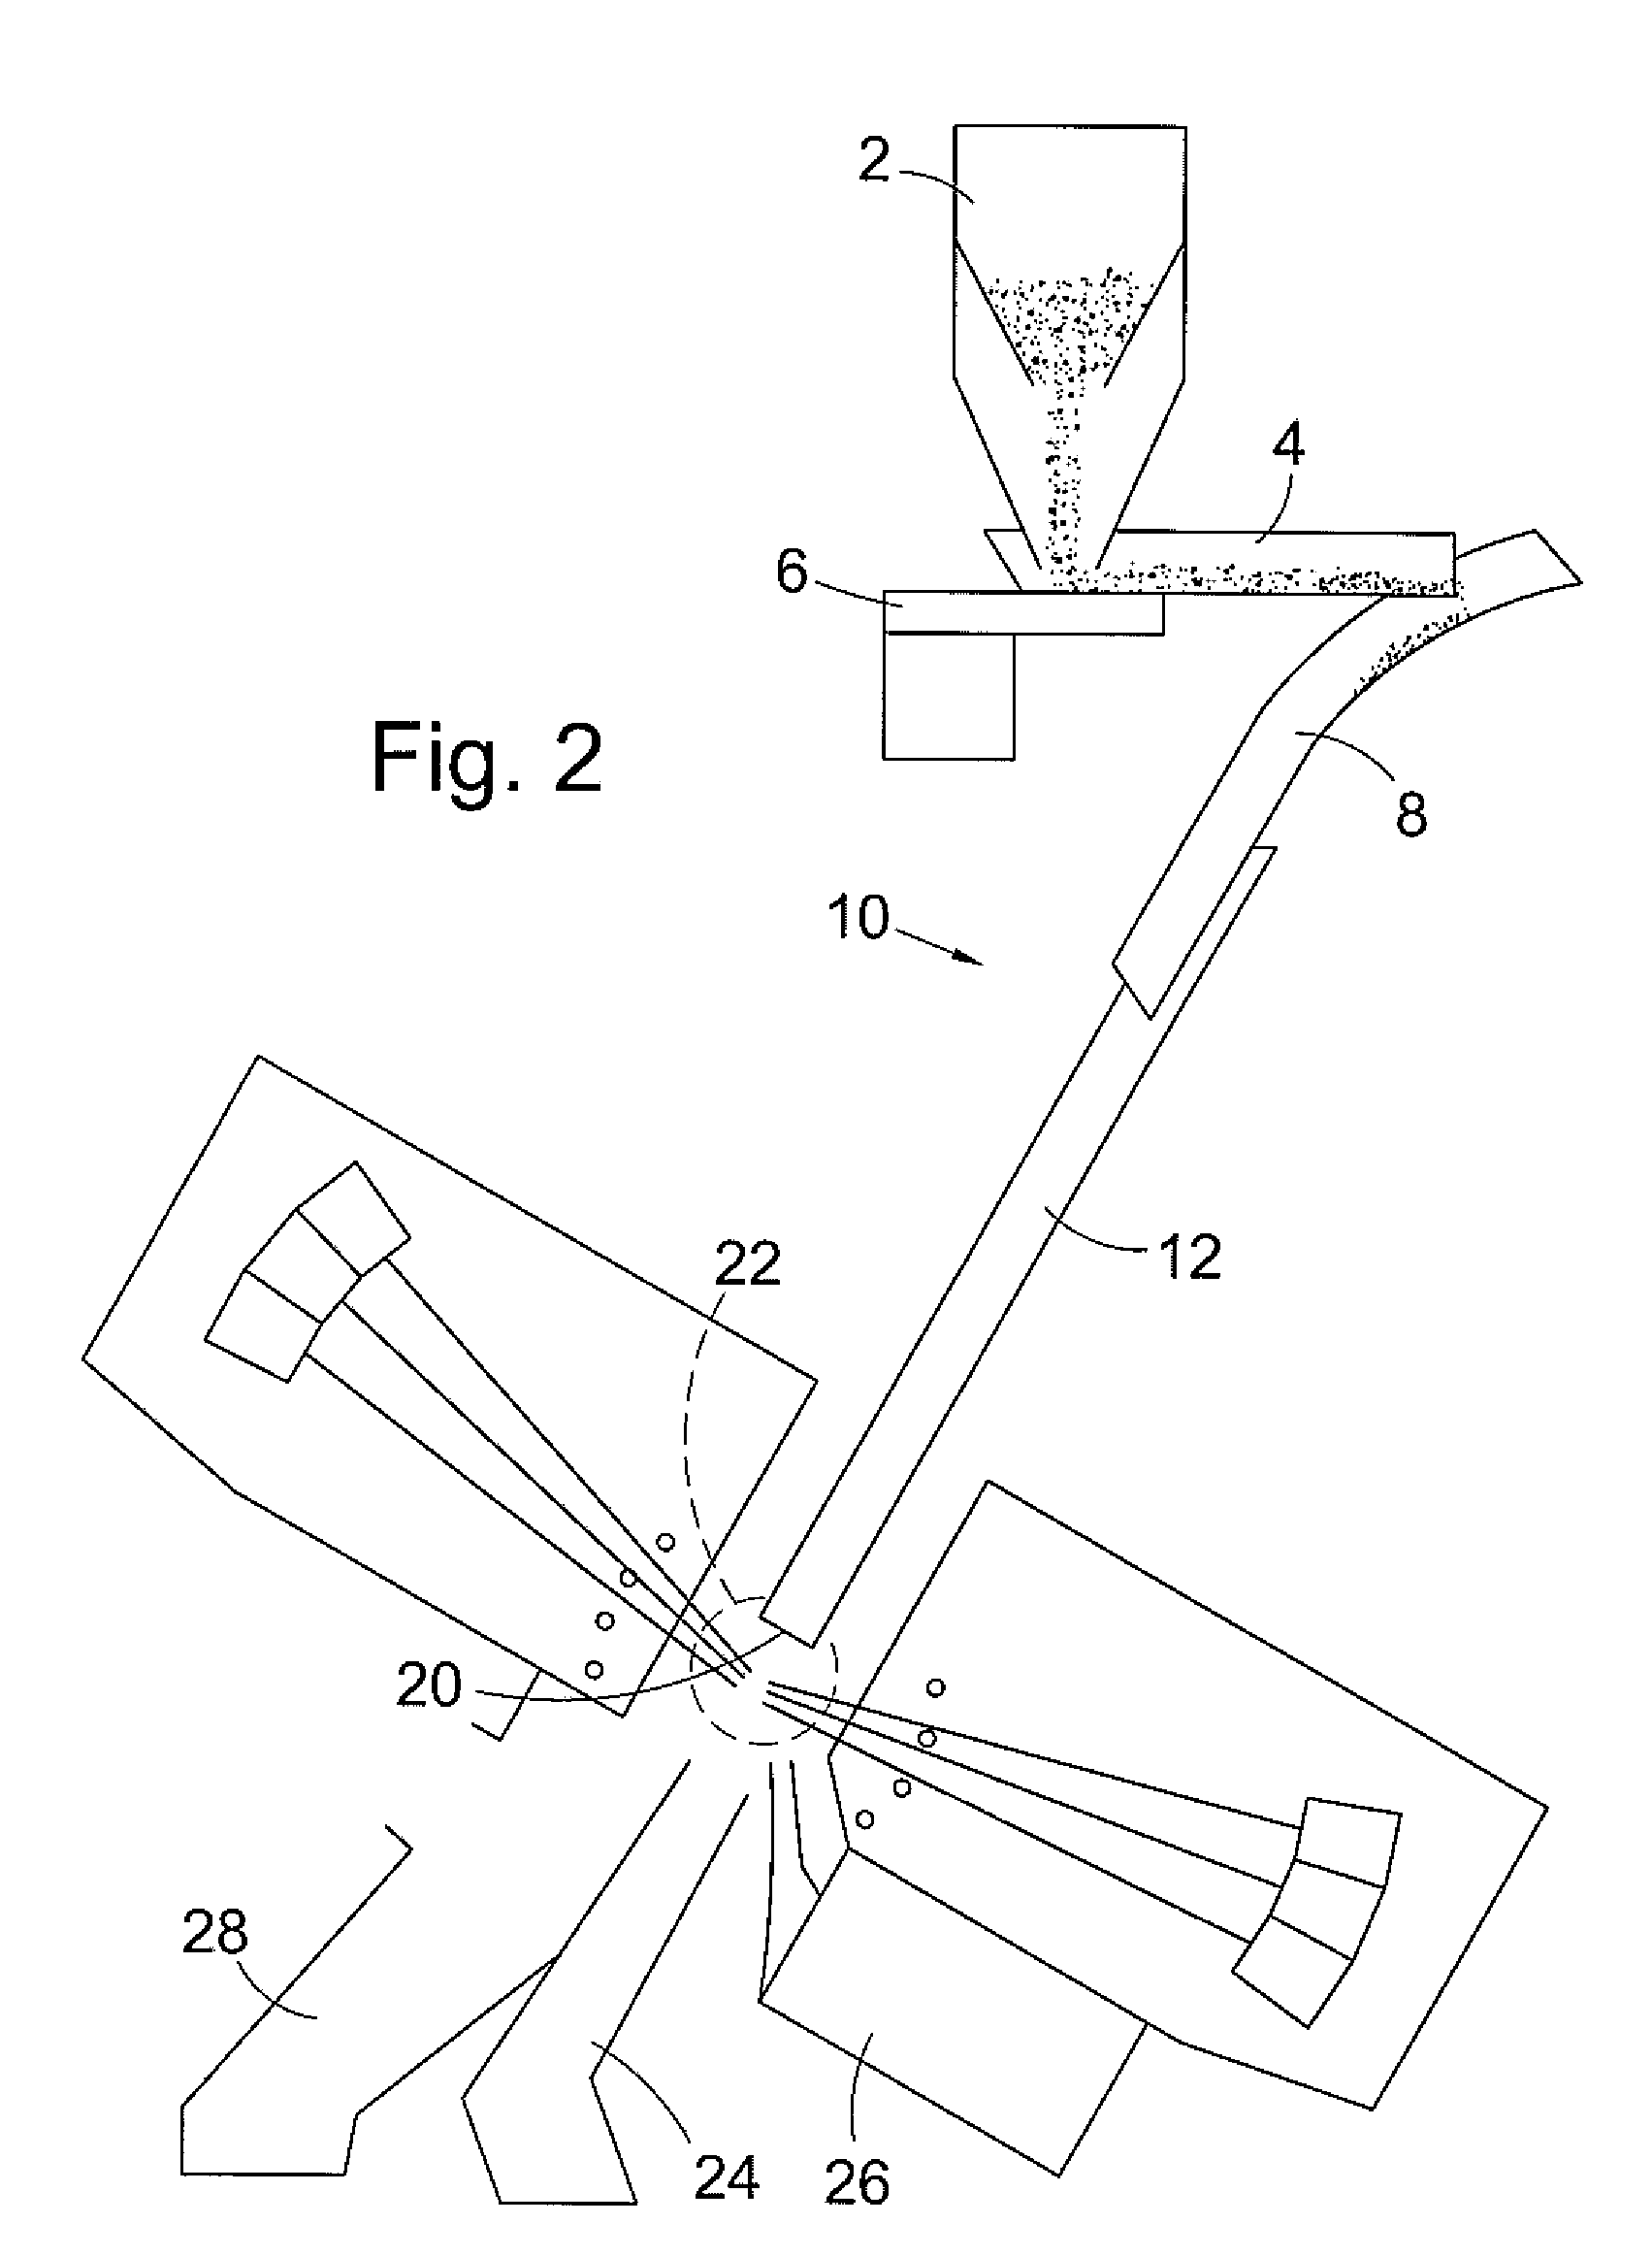 Chutes for sorting and inspection apparatus